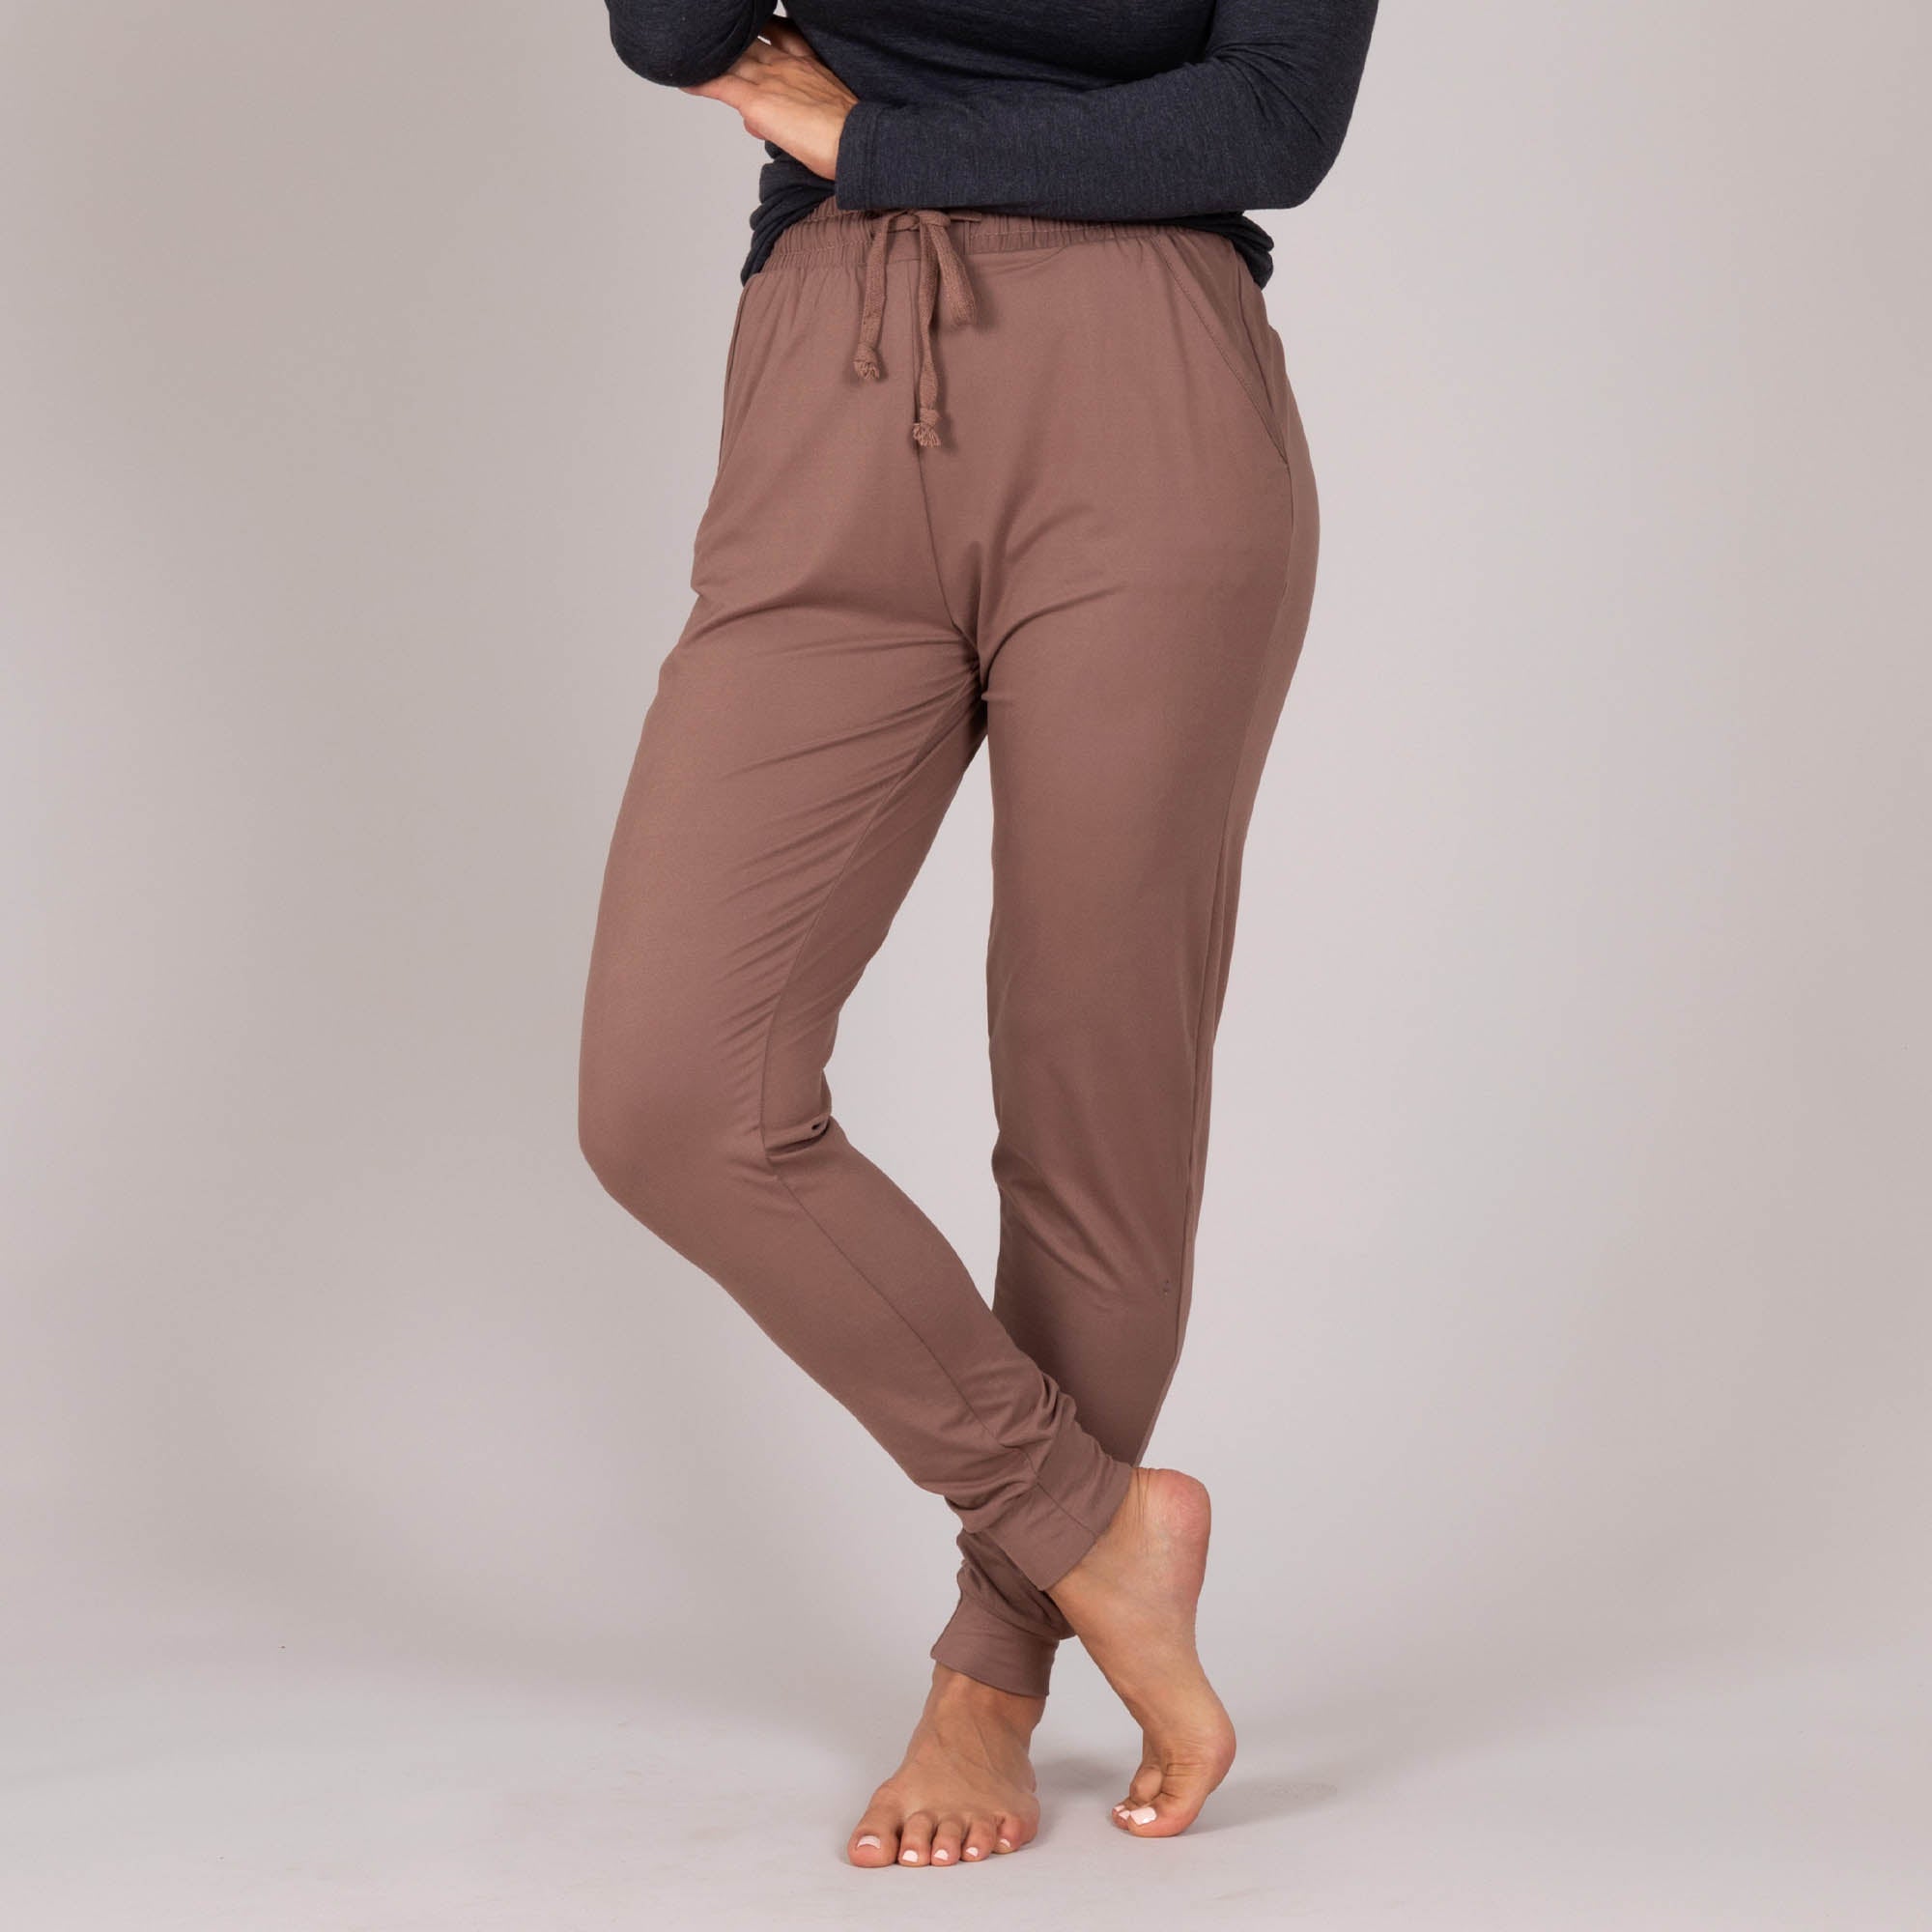 Solid Brushed Jogger Pants - Brown - M